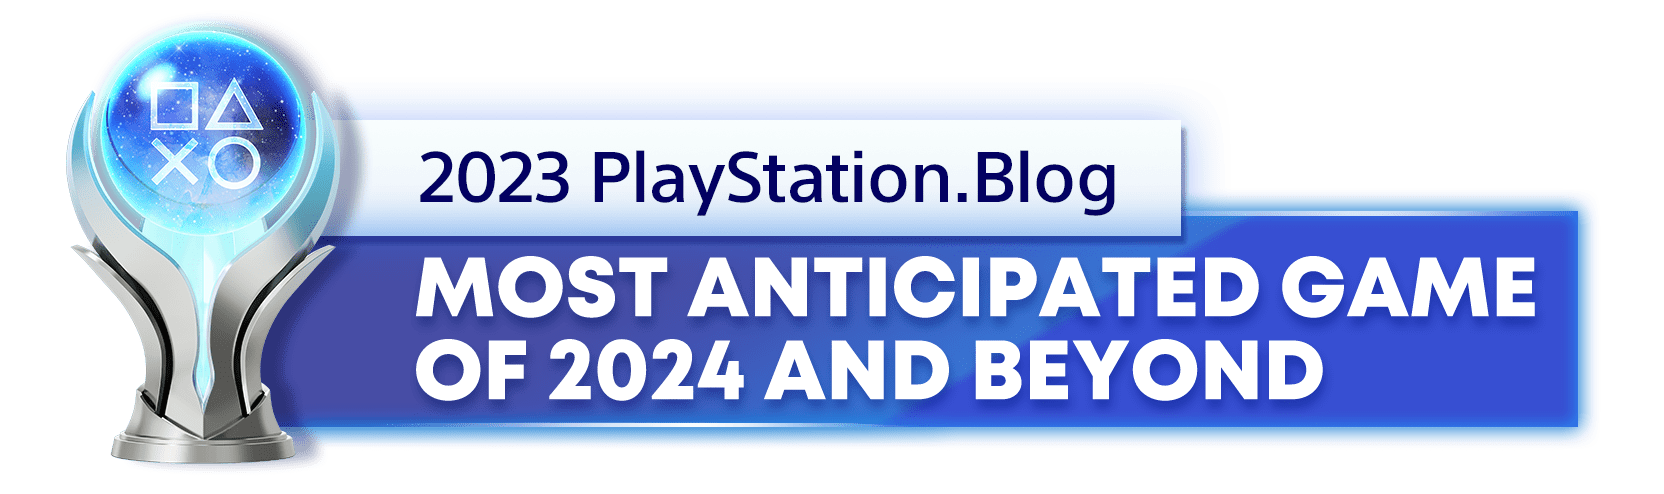 Platinum Trophy for the 2023 PlayStation Blog Most Anticipated PlayStation Game of 2024 and Beyond Winner